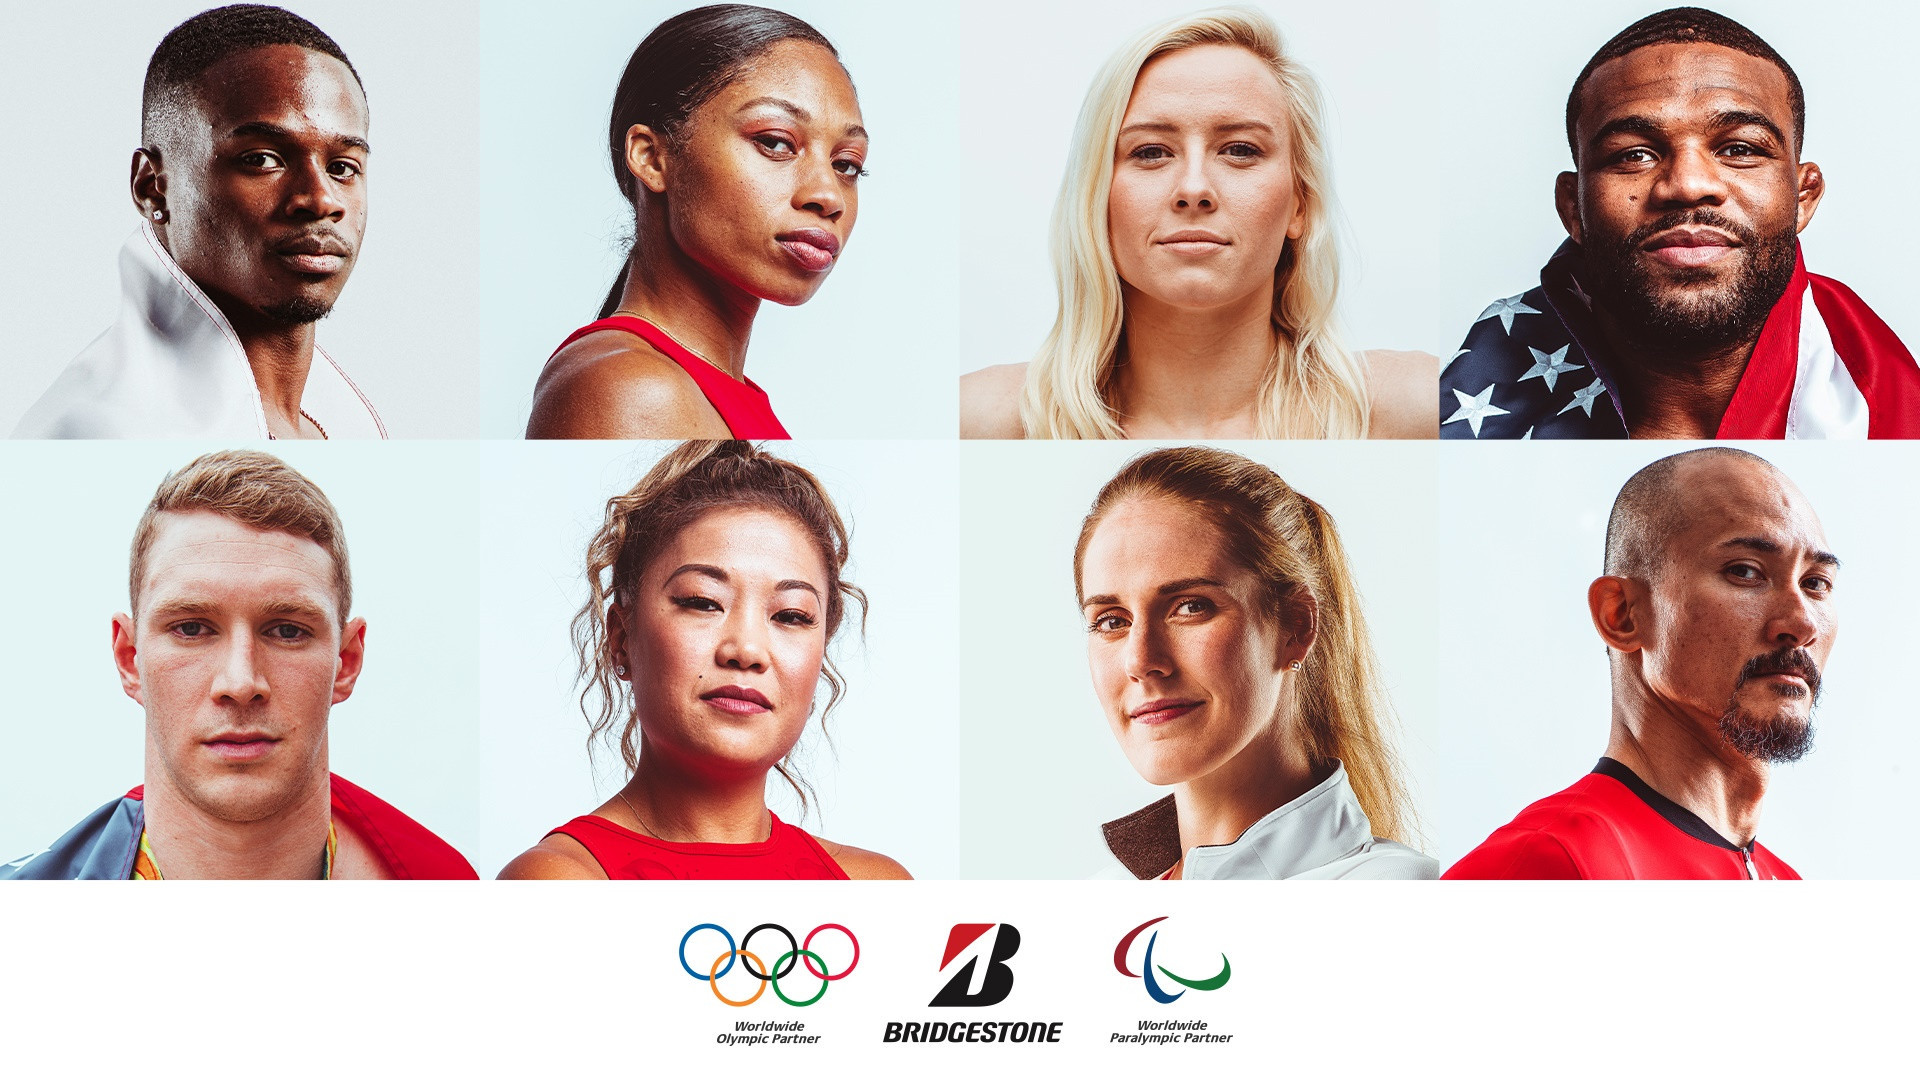 Bridgestone's athlete ambassadors from the US and Canada are set to get behind the 